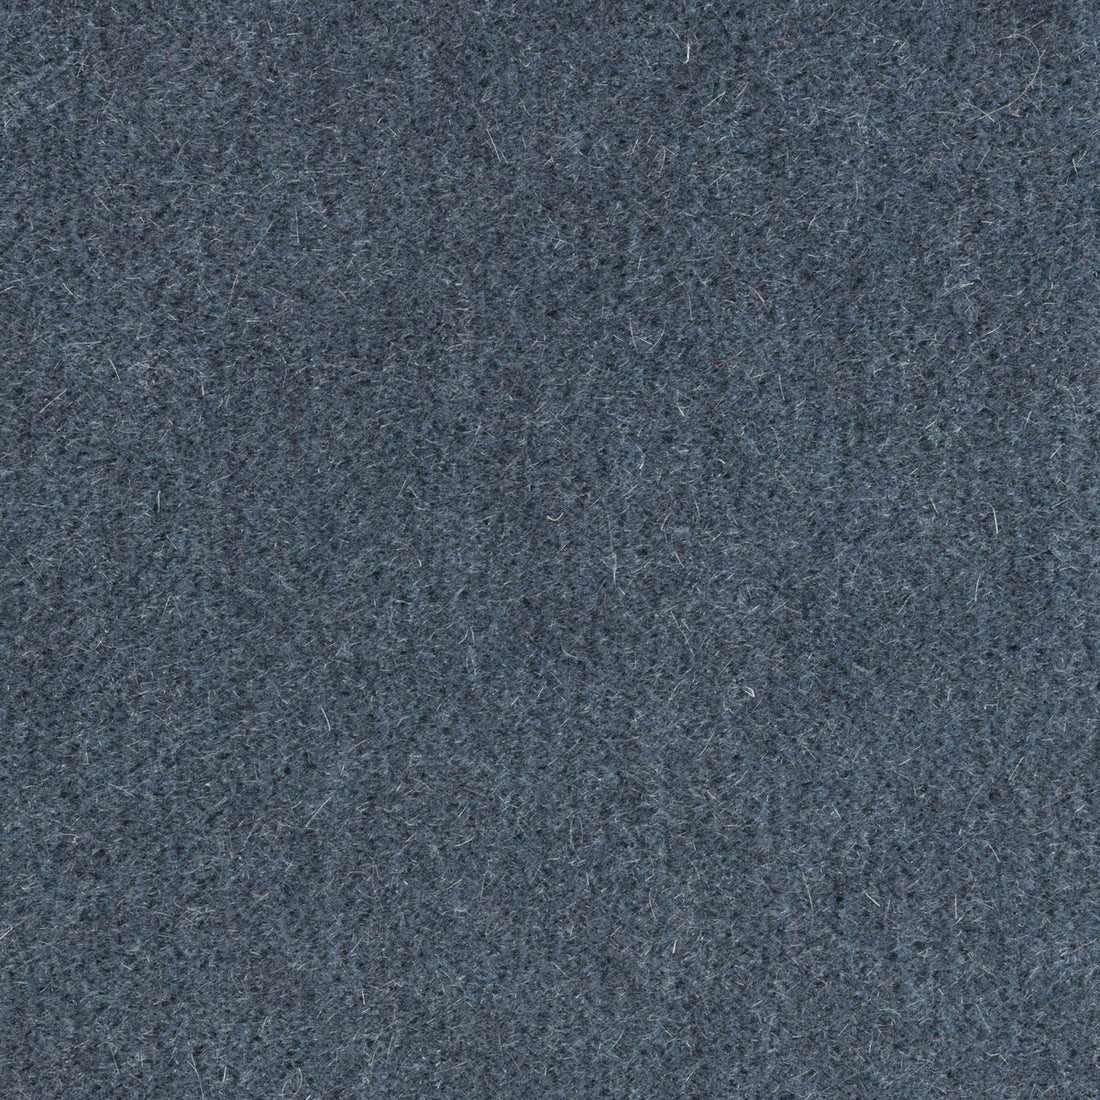 Bachelor Mohair fabric in stone blue color - pattern 8014101.5.0 - by Brunschwig &amp; Fils